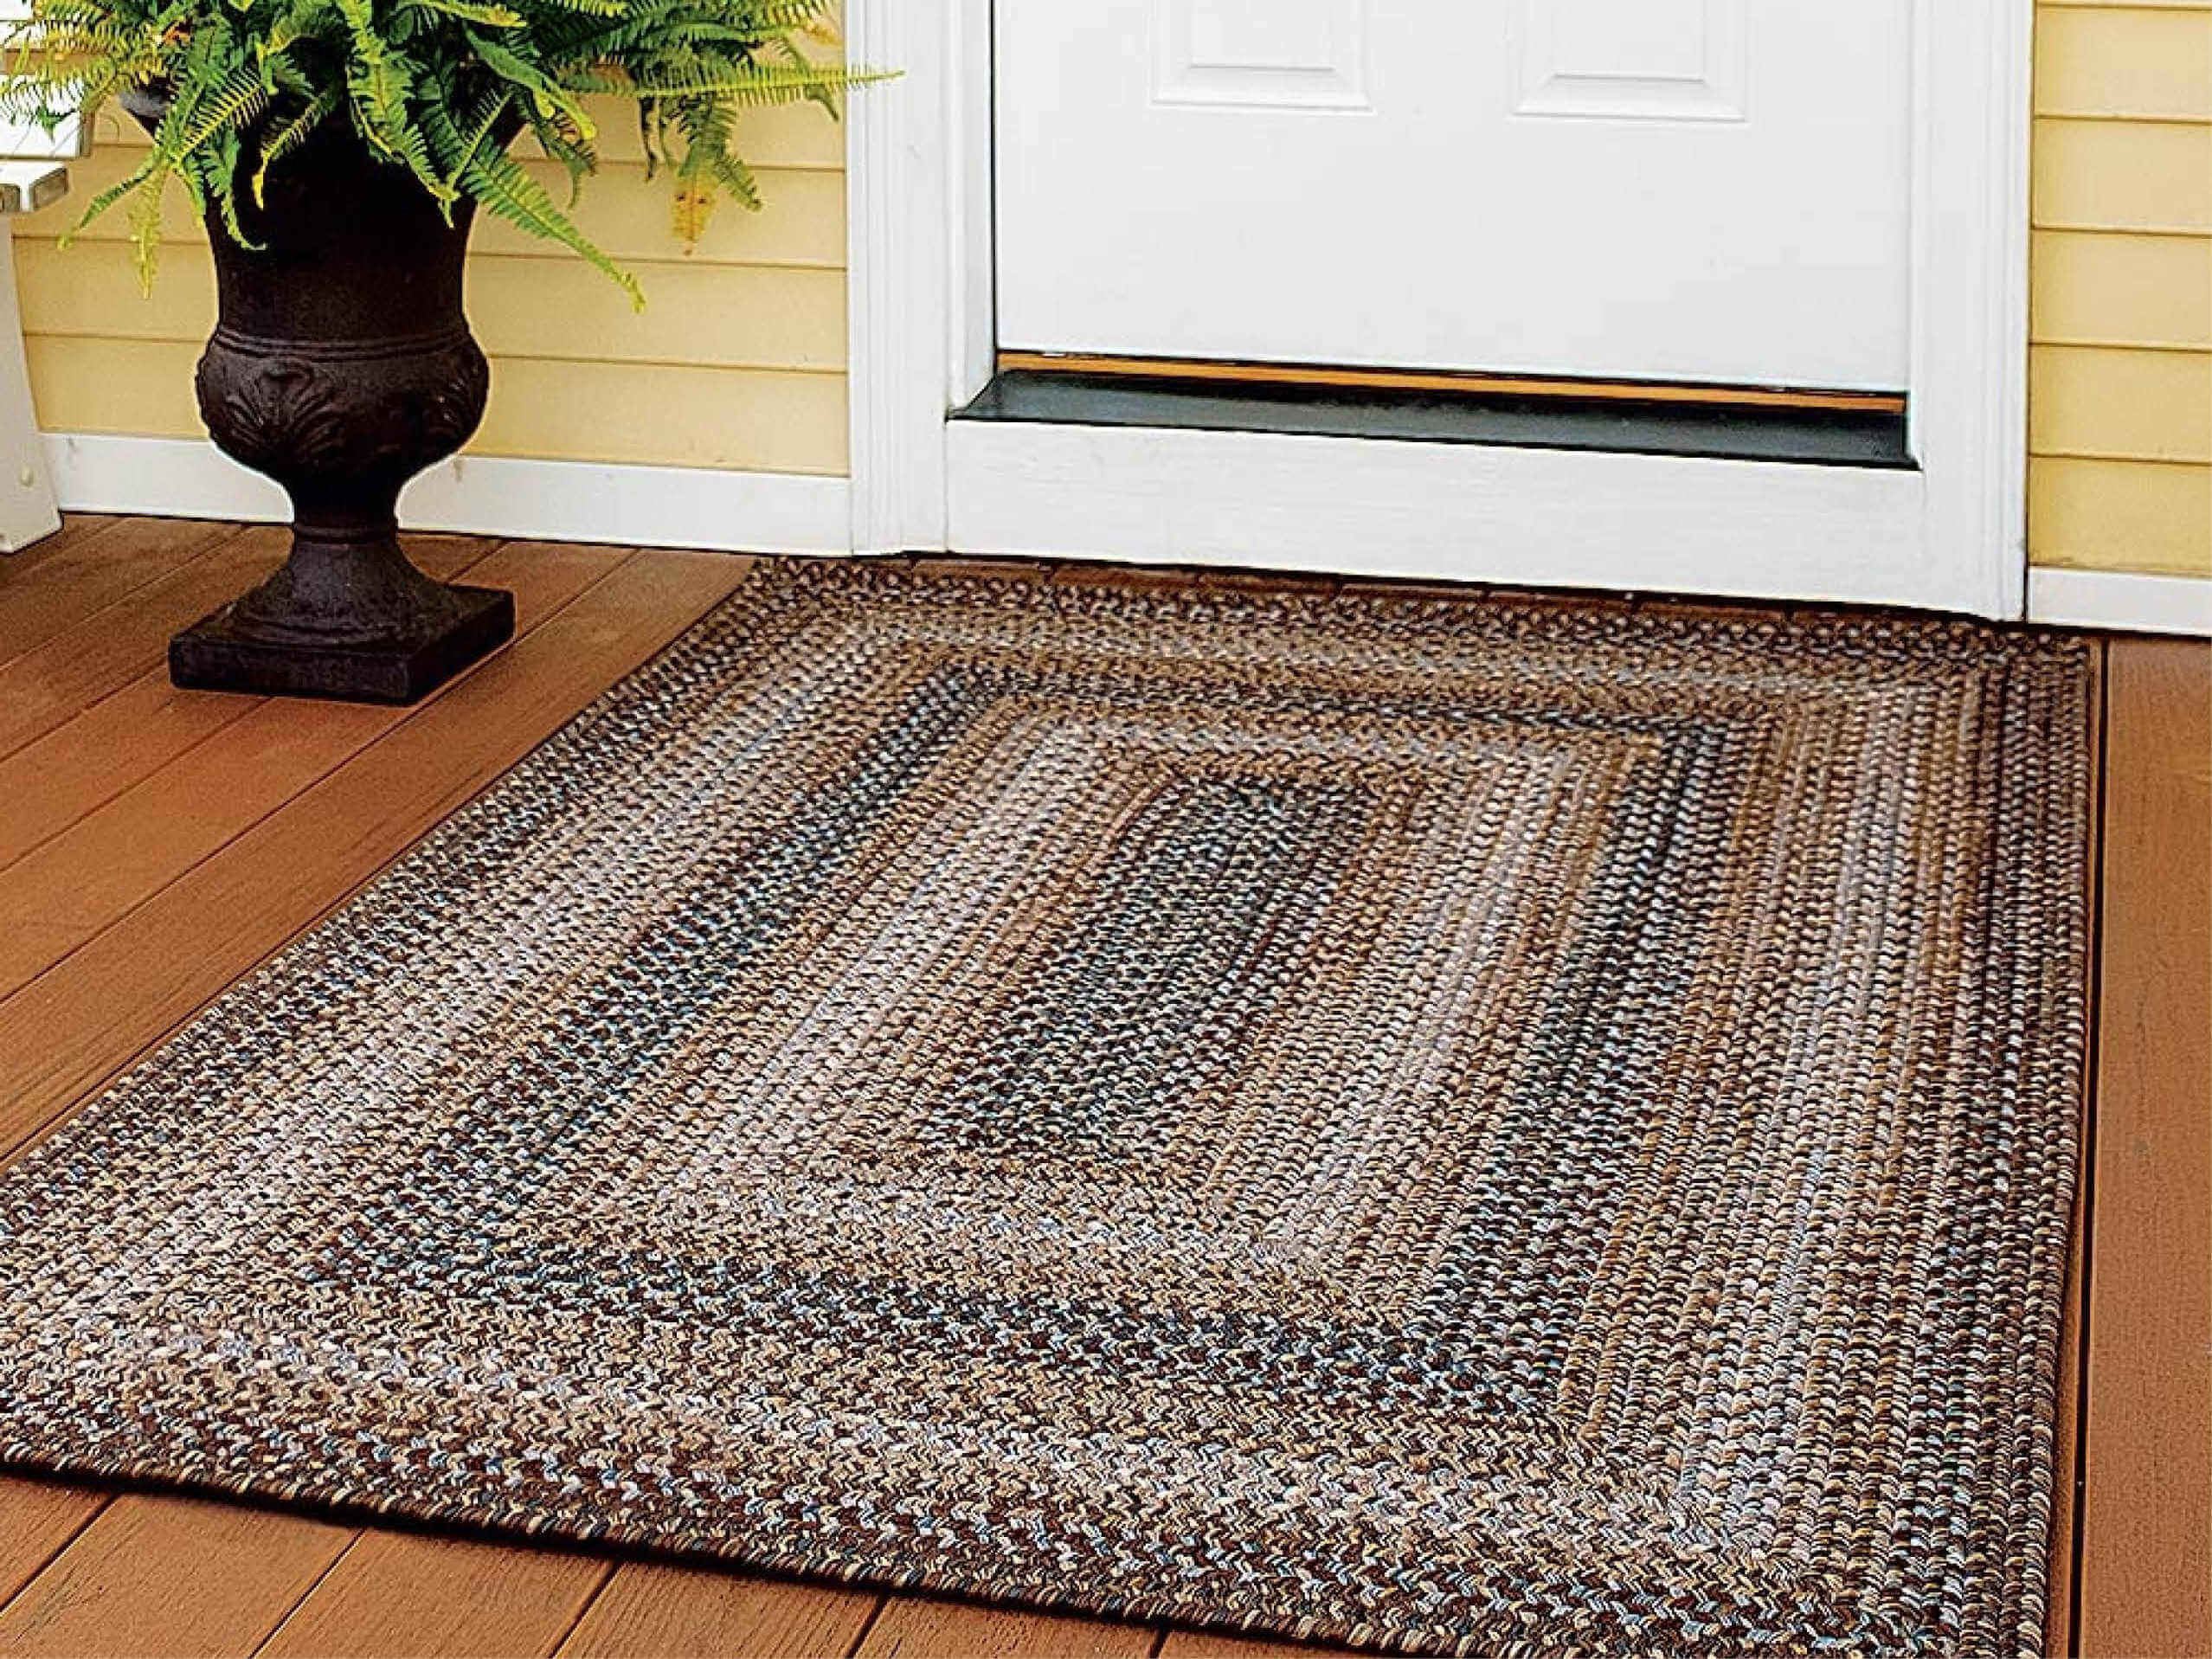 good rugs for under kitchen table